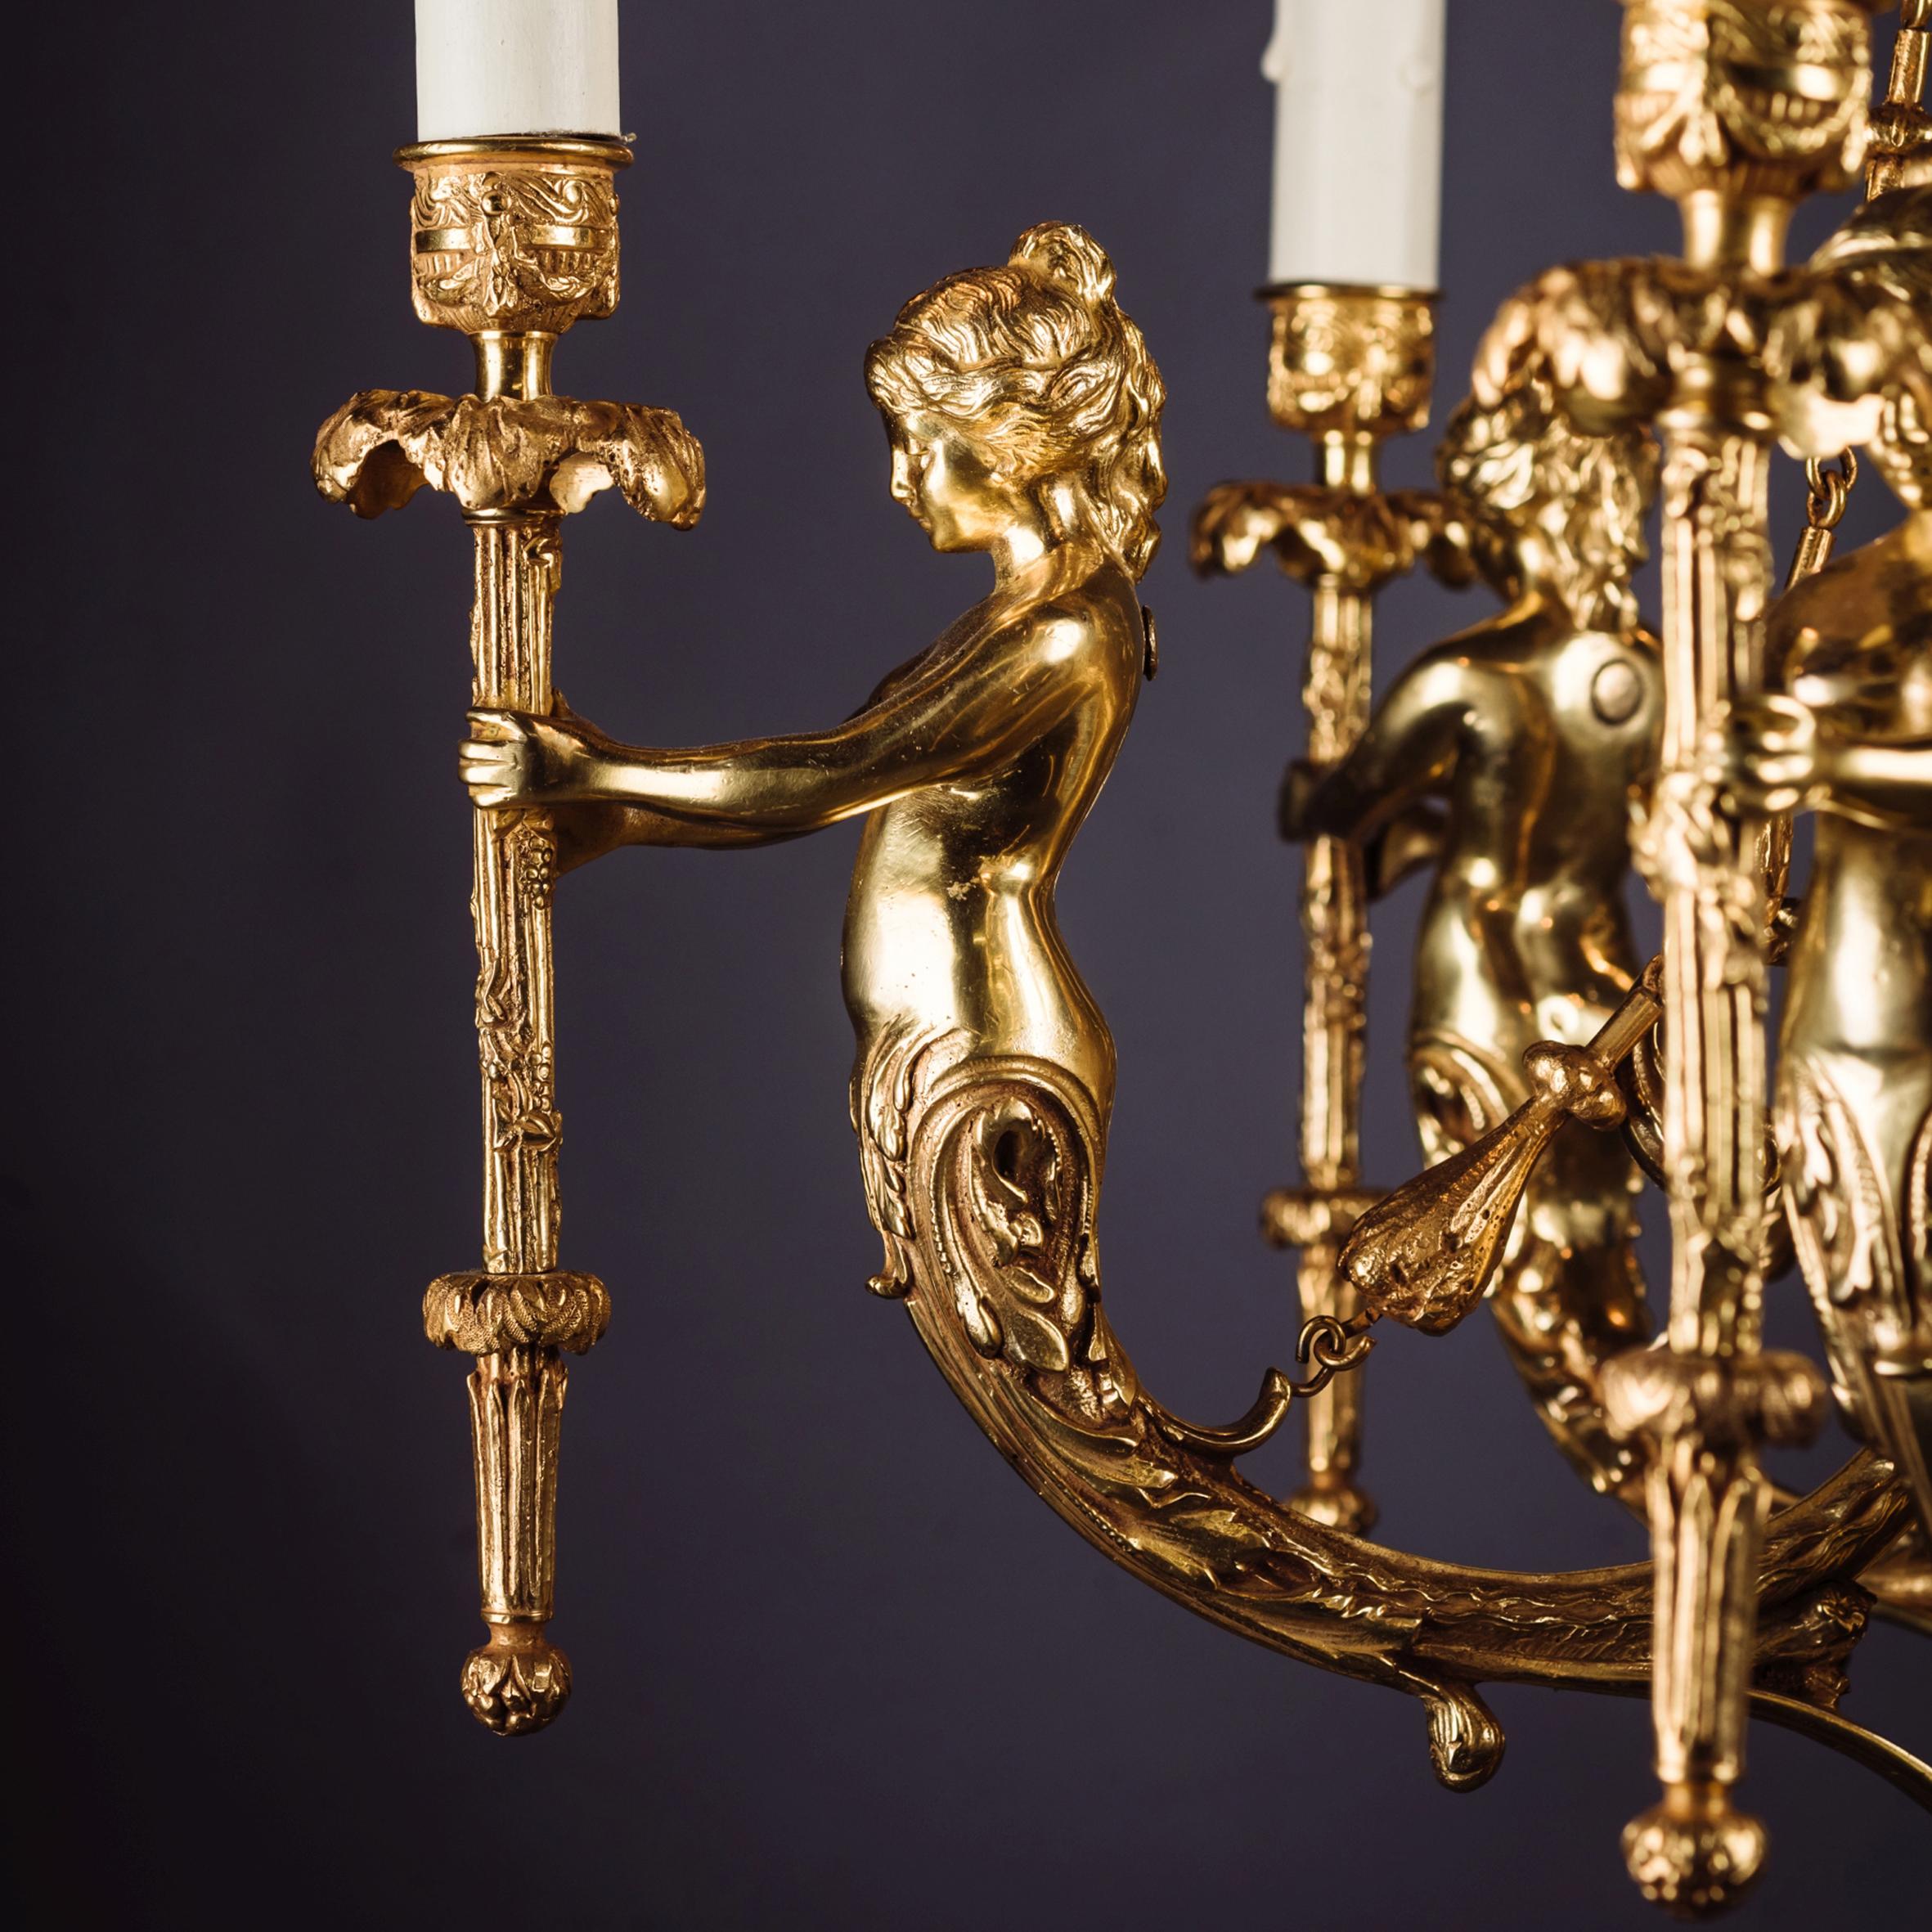 A fine gilt-bronze figural six-light figural chandelier.

The chandelier has an acanthus cast finial above a domed corona, finely cast with drapery and suspending bellflower chains, above a central stem and ovoid urn. The urn issuing six scrolling